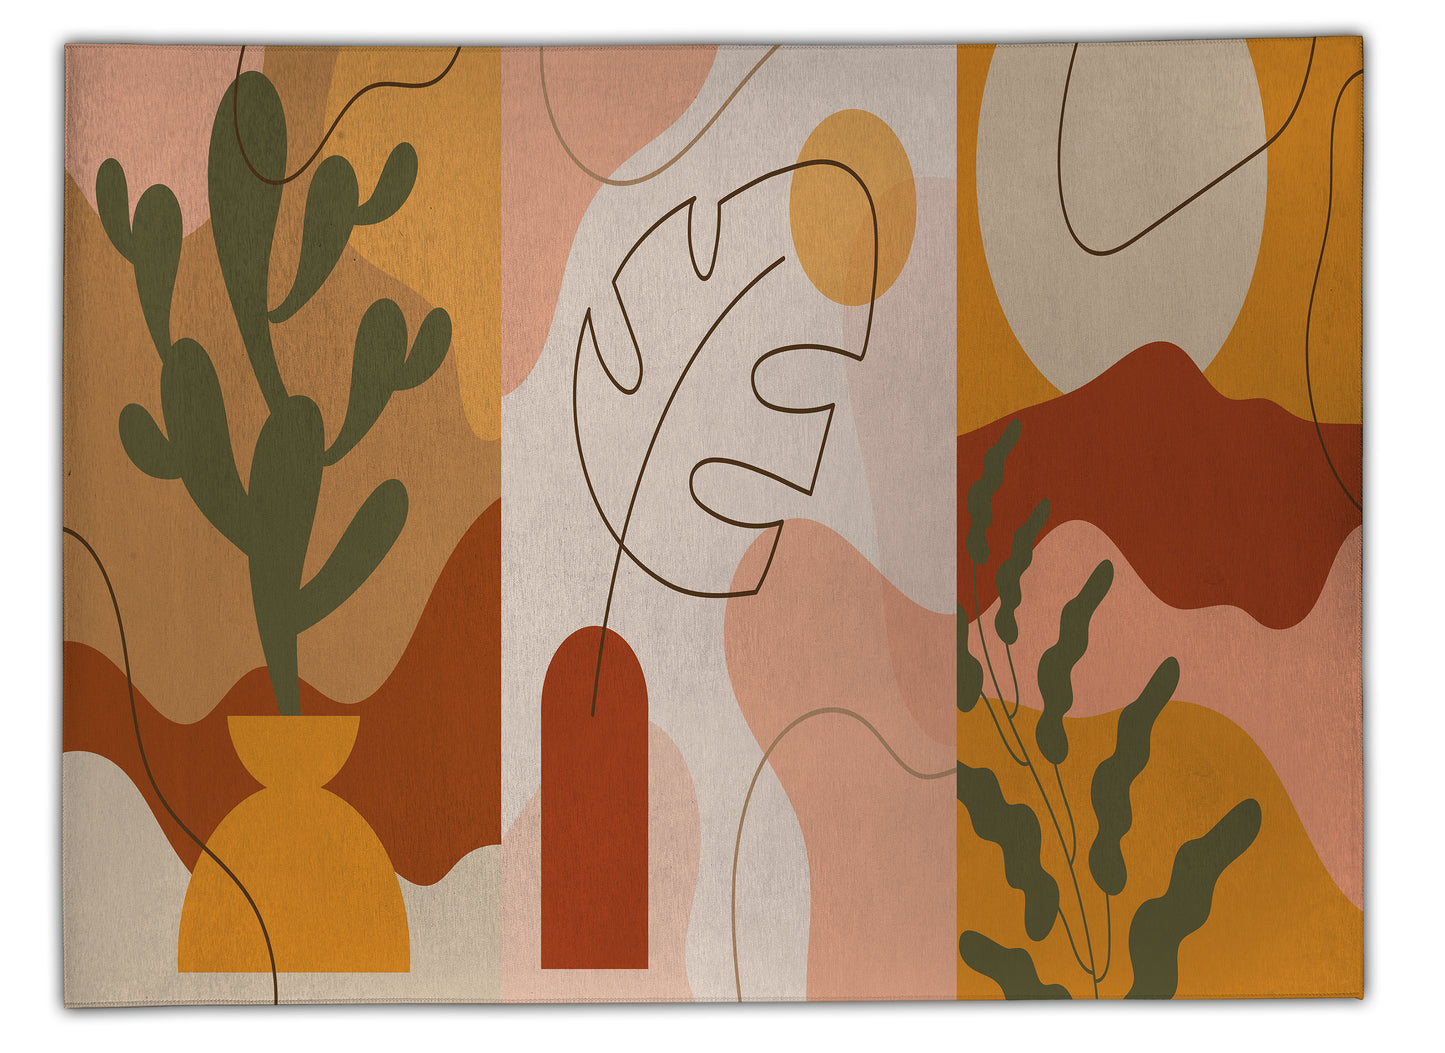 Abstract Desert Low Pile Area Rug